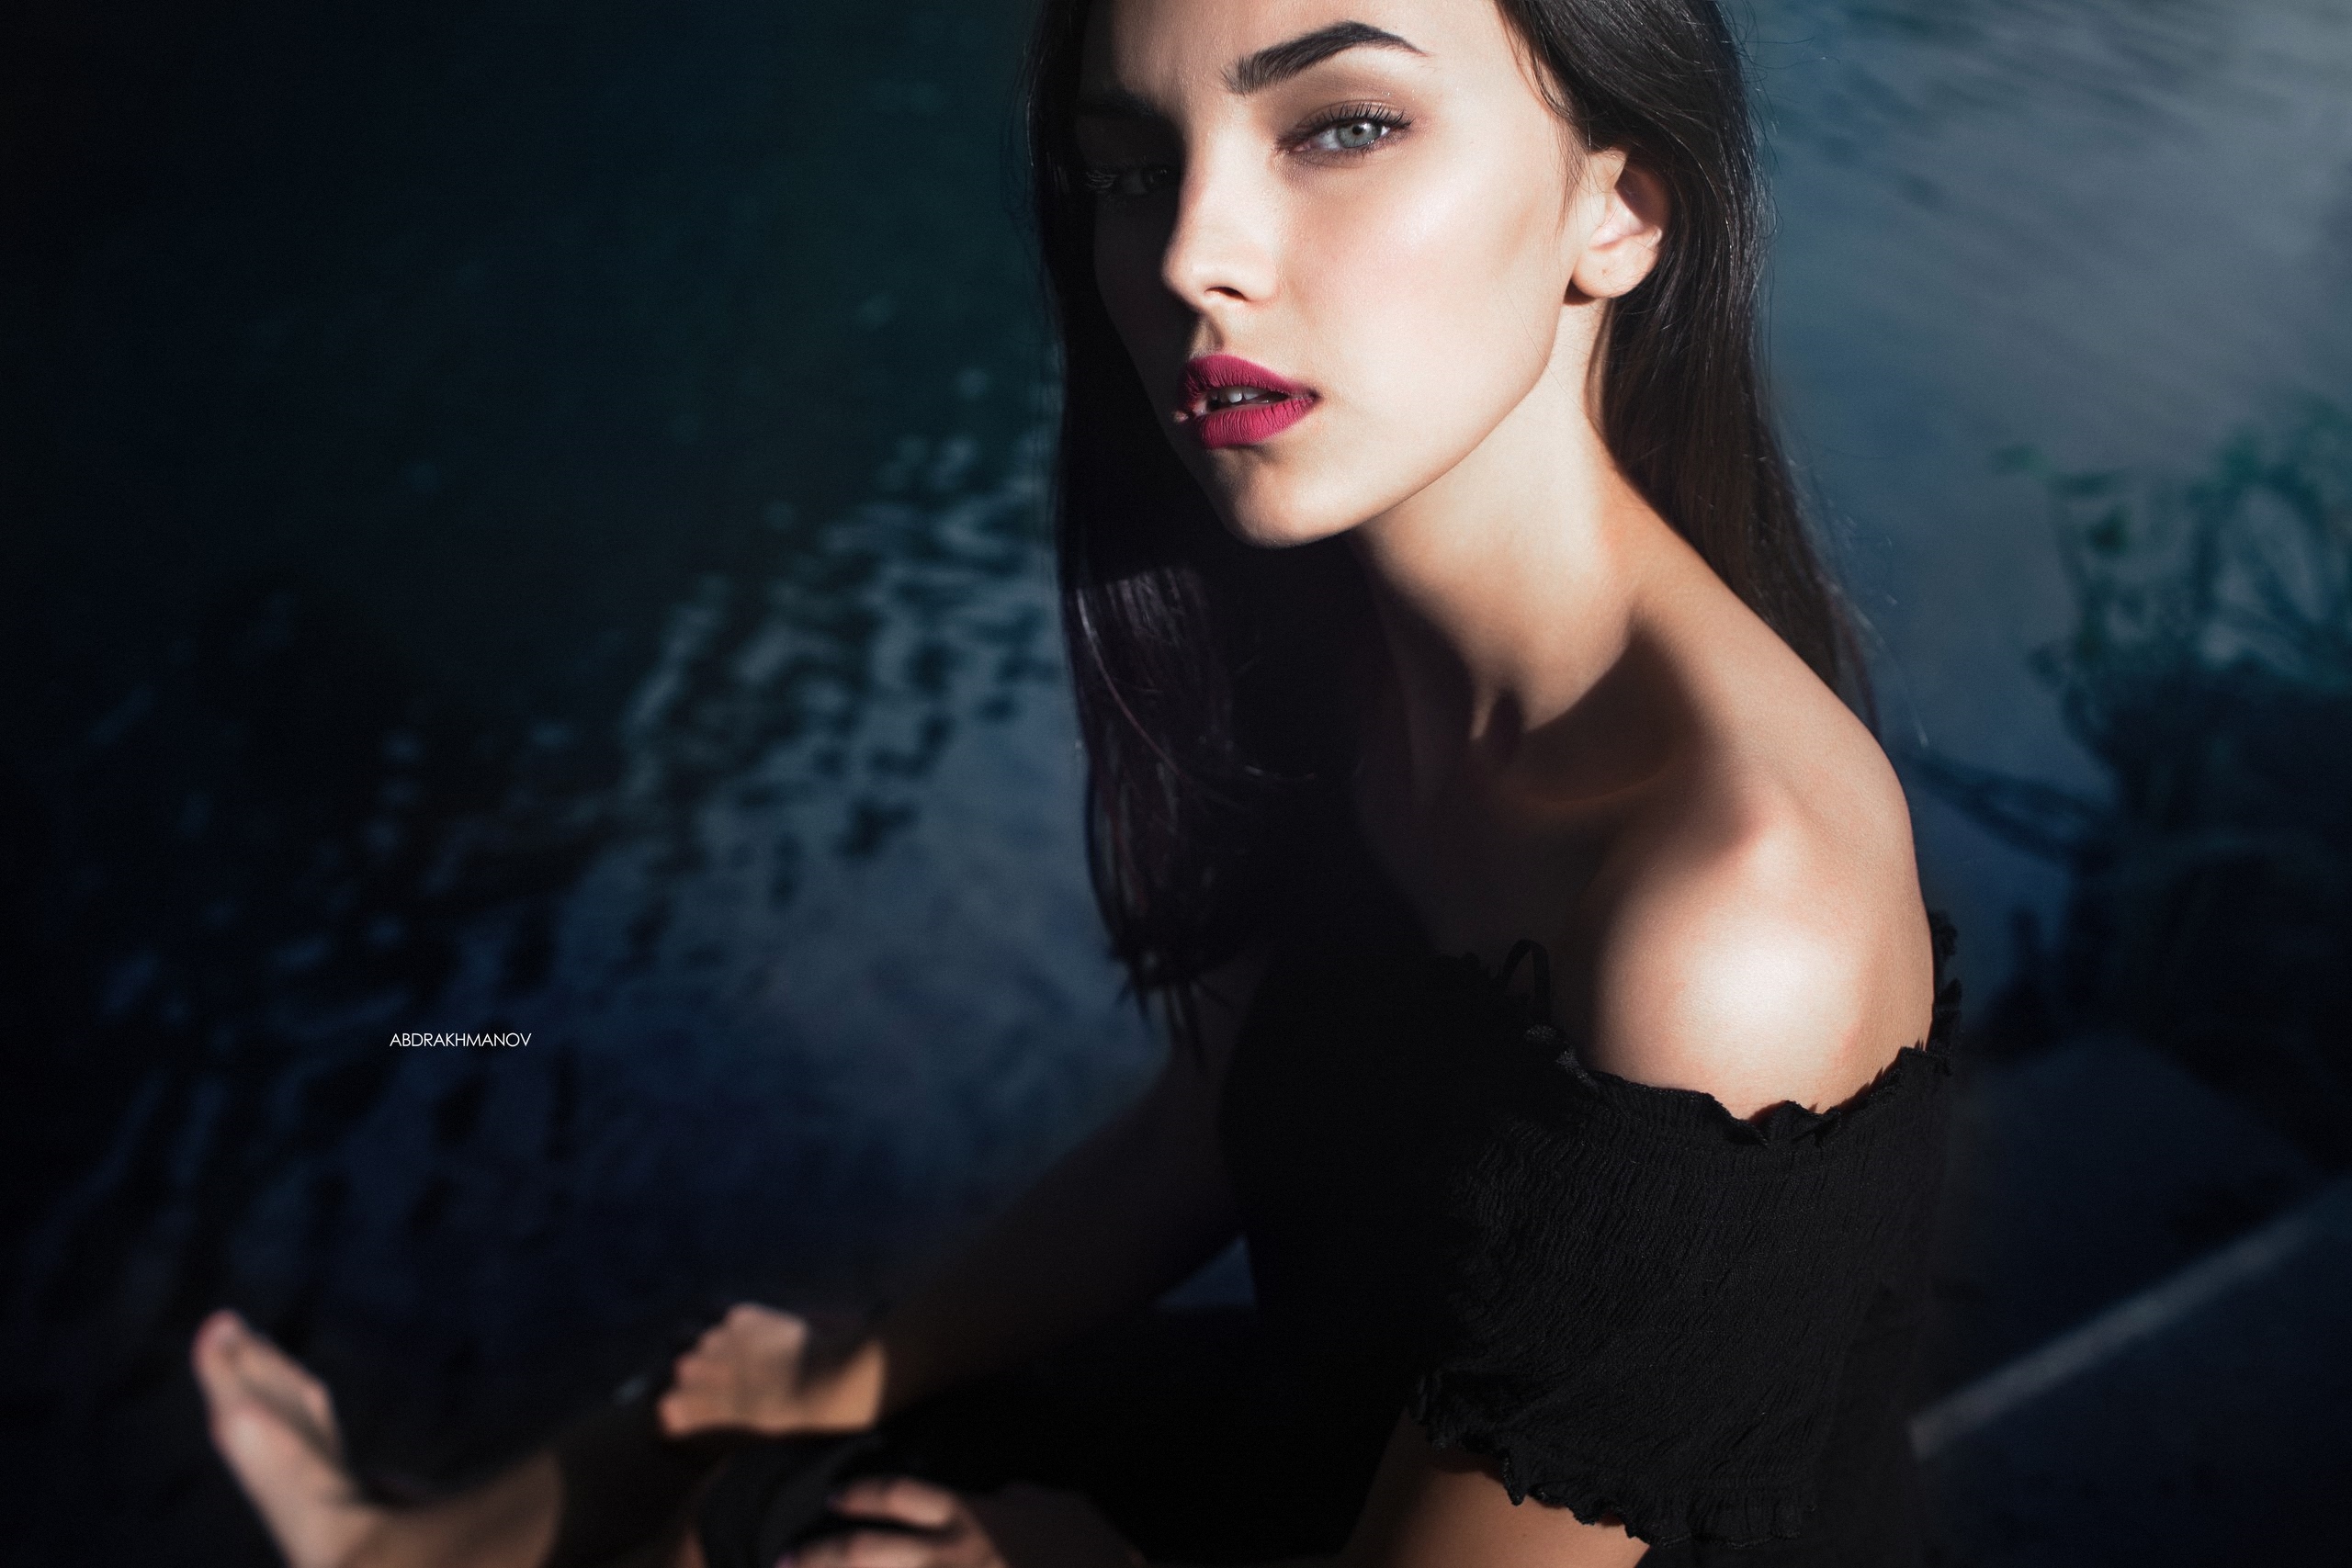 People 2560x1707 Lenar Abdrakhmanov women model portrait looking at viewer outdoors depth of field bare shoulders black top barefoot red lipstick dark hair water sitting women outdoors Aisuly